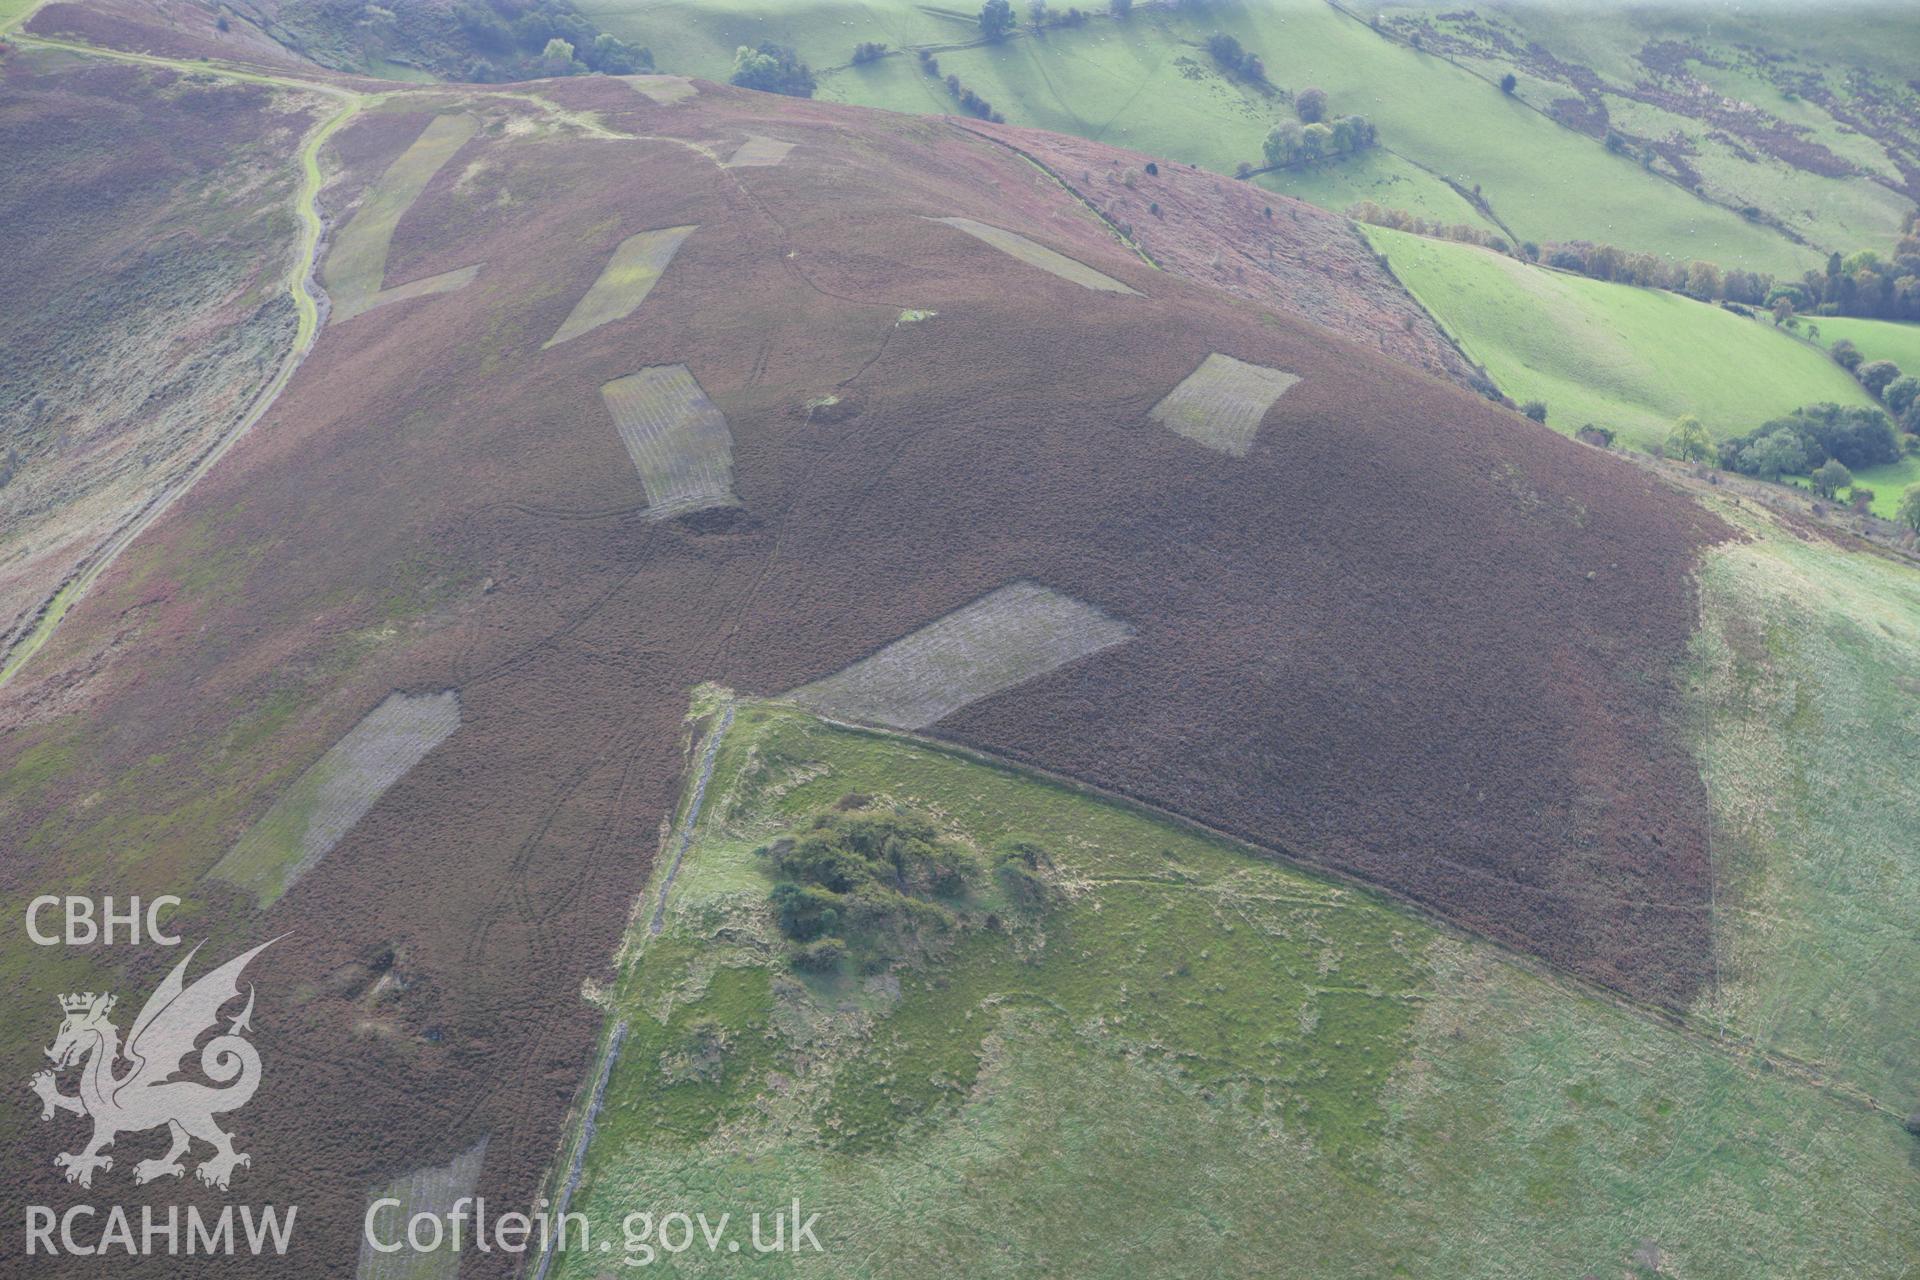 RCAHMW colour oblique aerial photograph of Moel Gyw Barrow. Taken on 13 October 2009 by Toby Driver